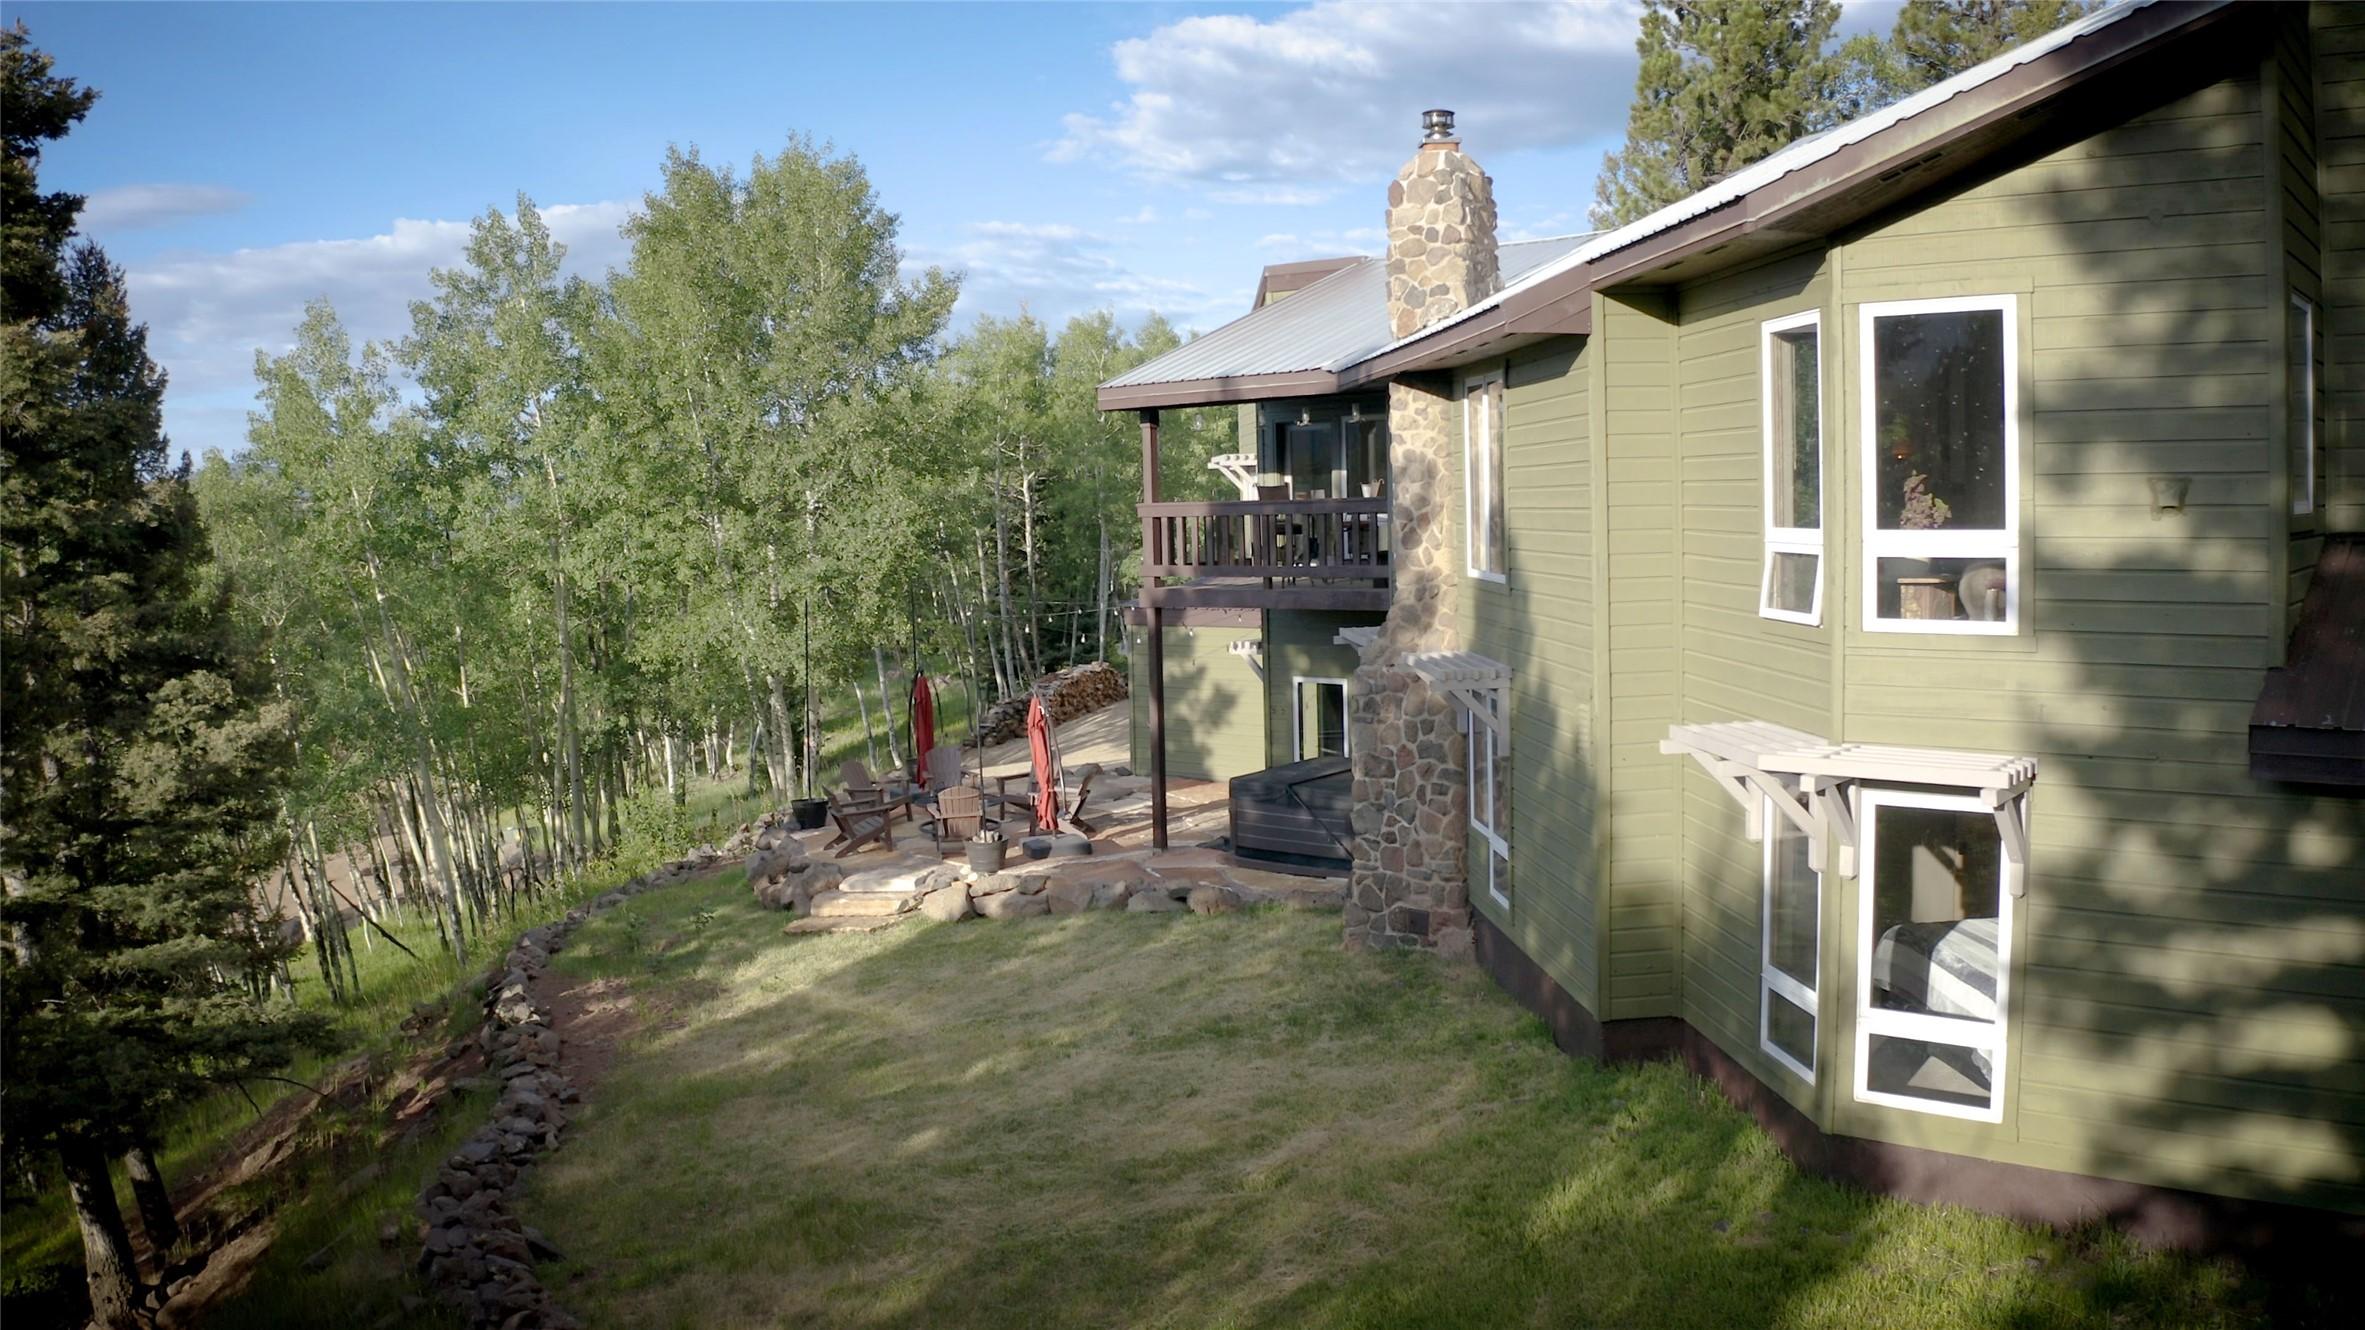 31 Starshine Overlook, Angel Fire, New Mexico, 87710, United States, 4 Bedrooms Bedrooms, ,3 BathroomsBathrooms,Residential,For Sale,31 Starshine Overlook,1430523